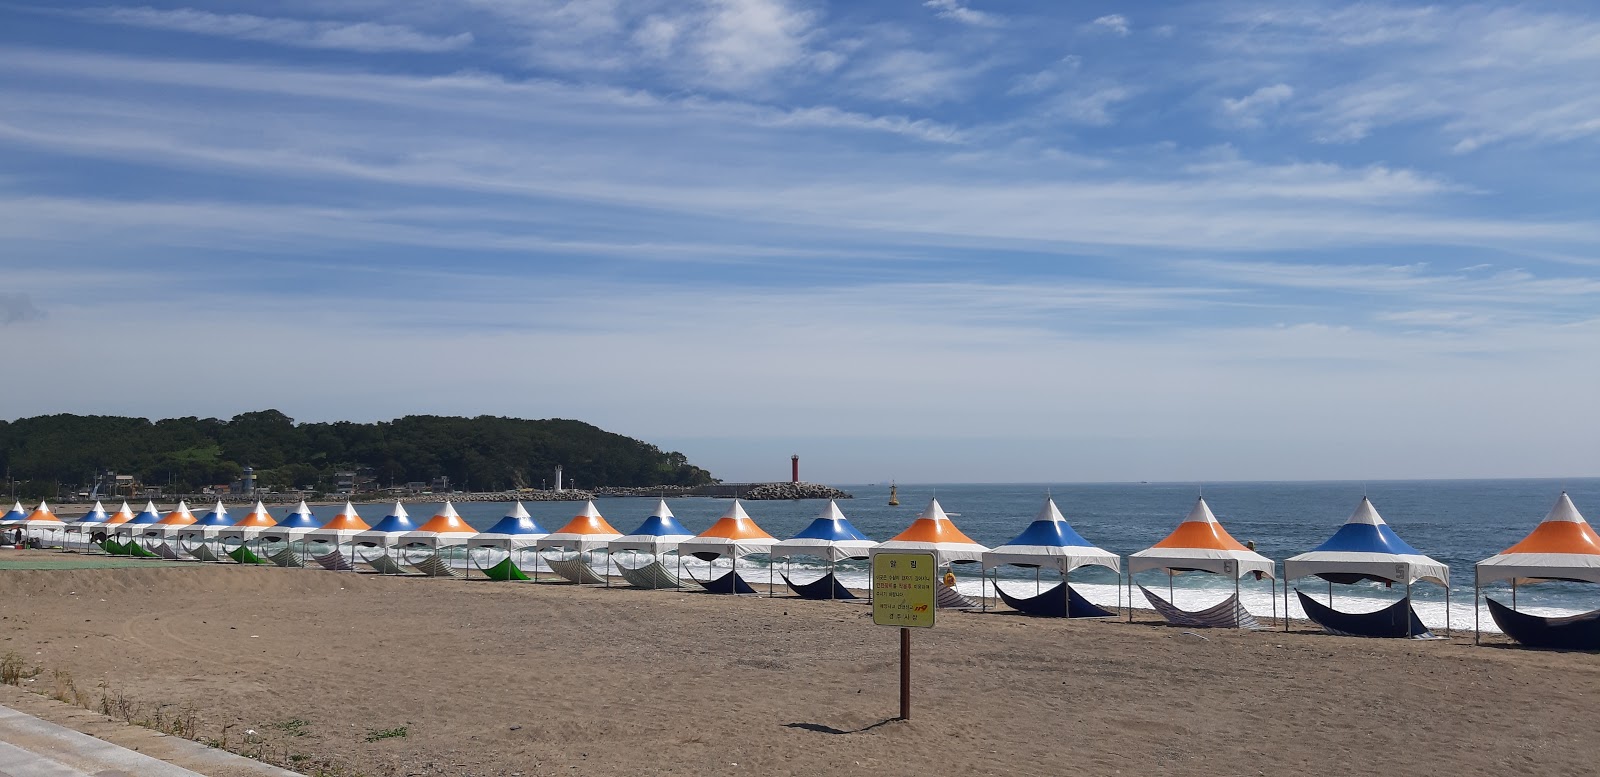 Photo of Najeong Beach - popular place among relax connoisseurs